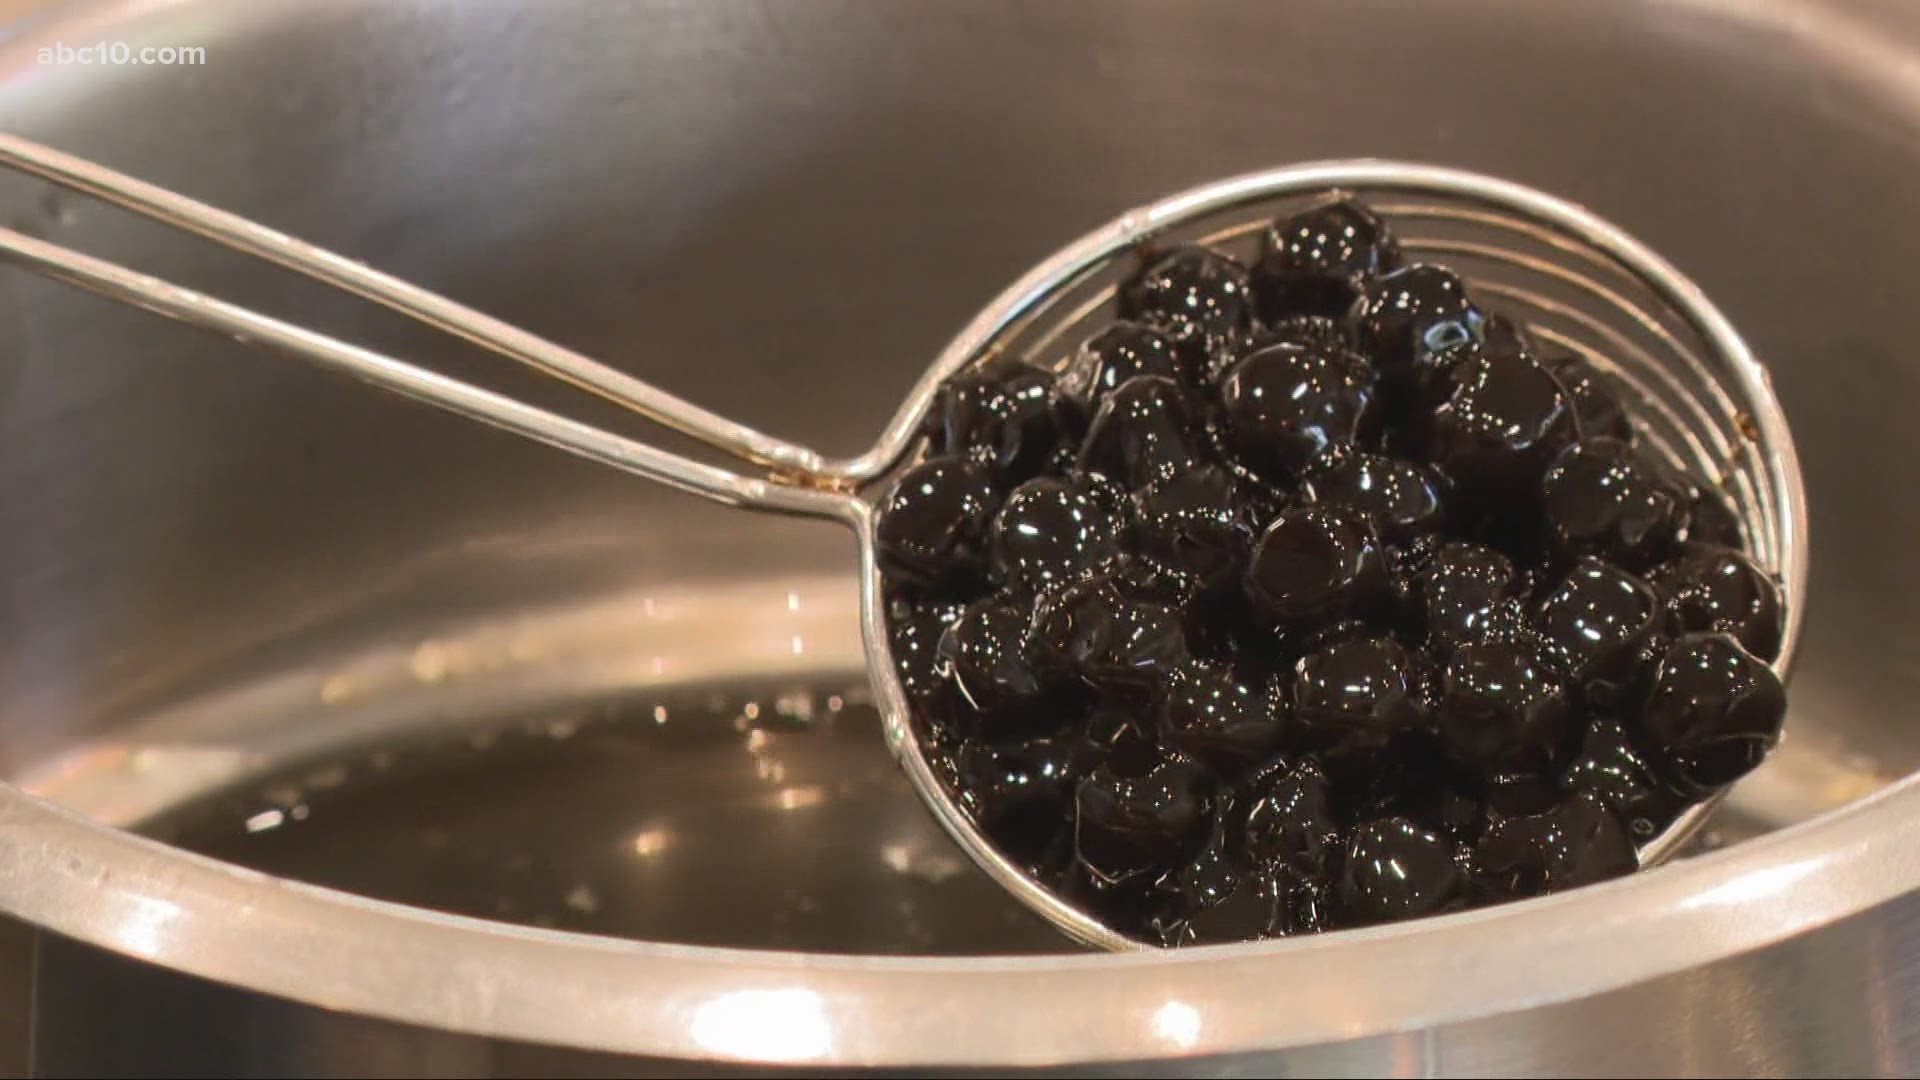 Pearls' owner says business is being cautious by rationing what Boba they have.